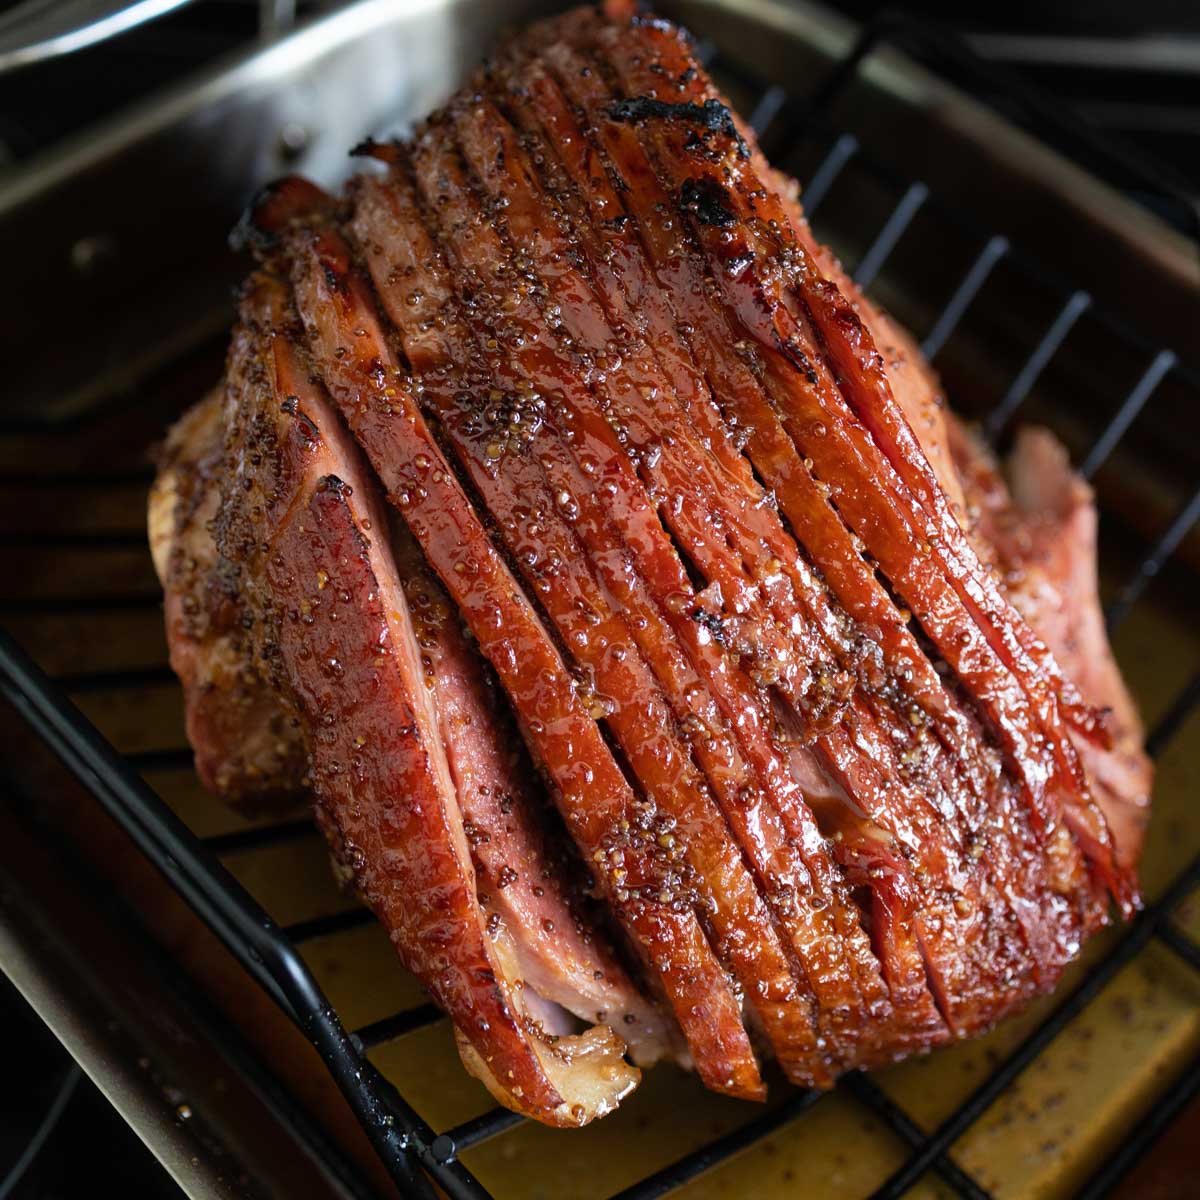 The spiral ham is on a roasting rack so it can be broiled to make the brown sugar glaze crispy.